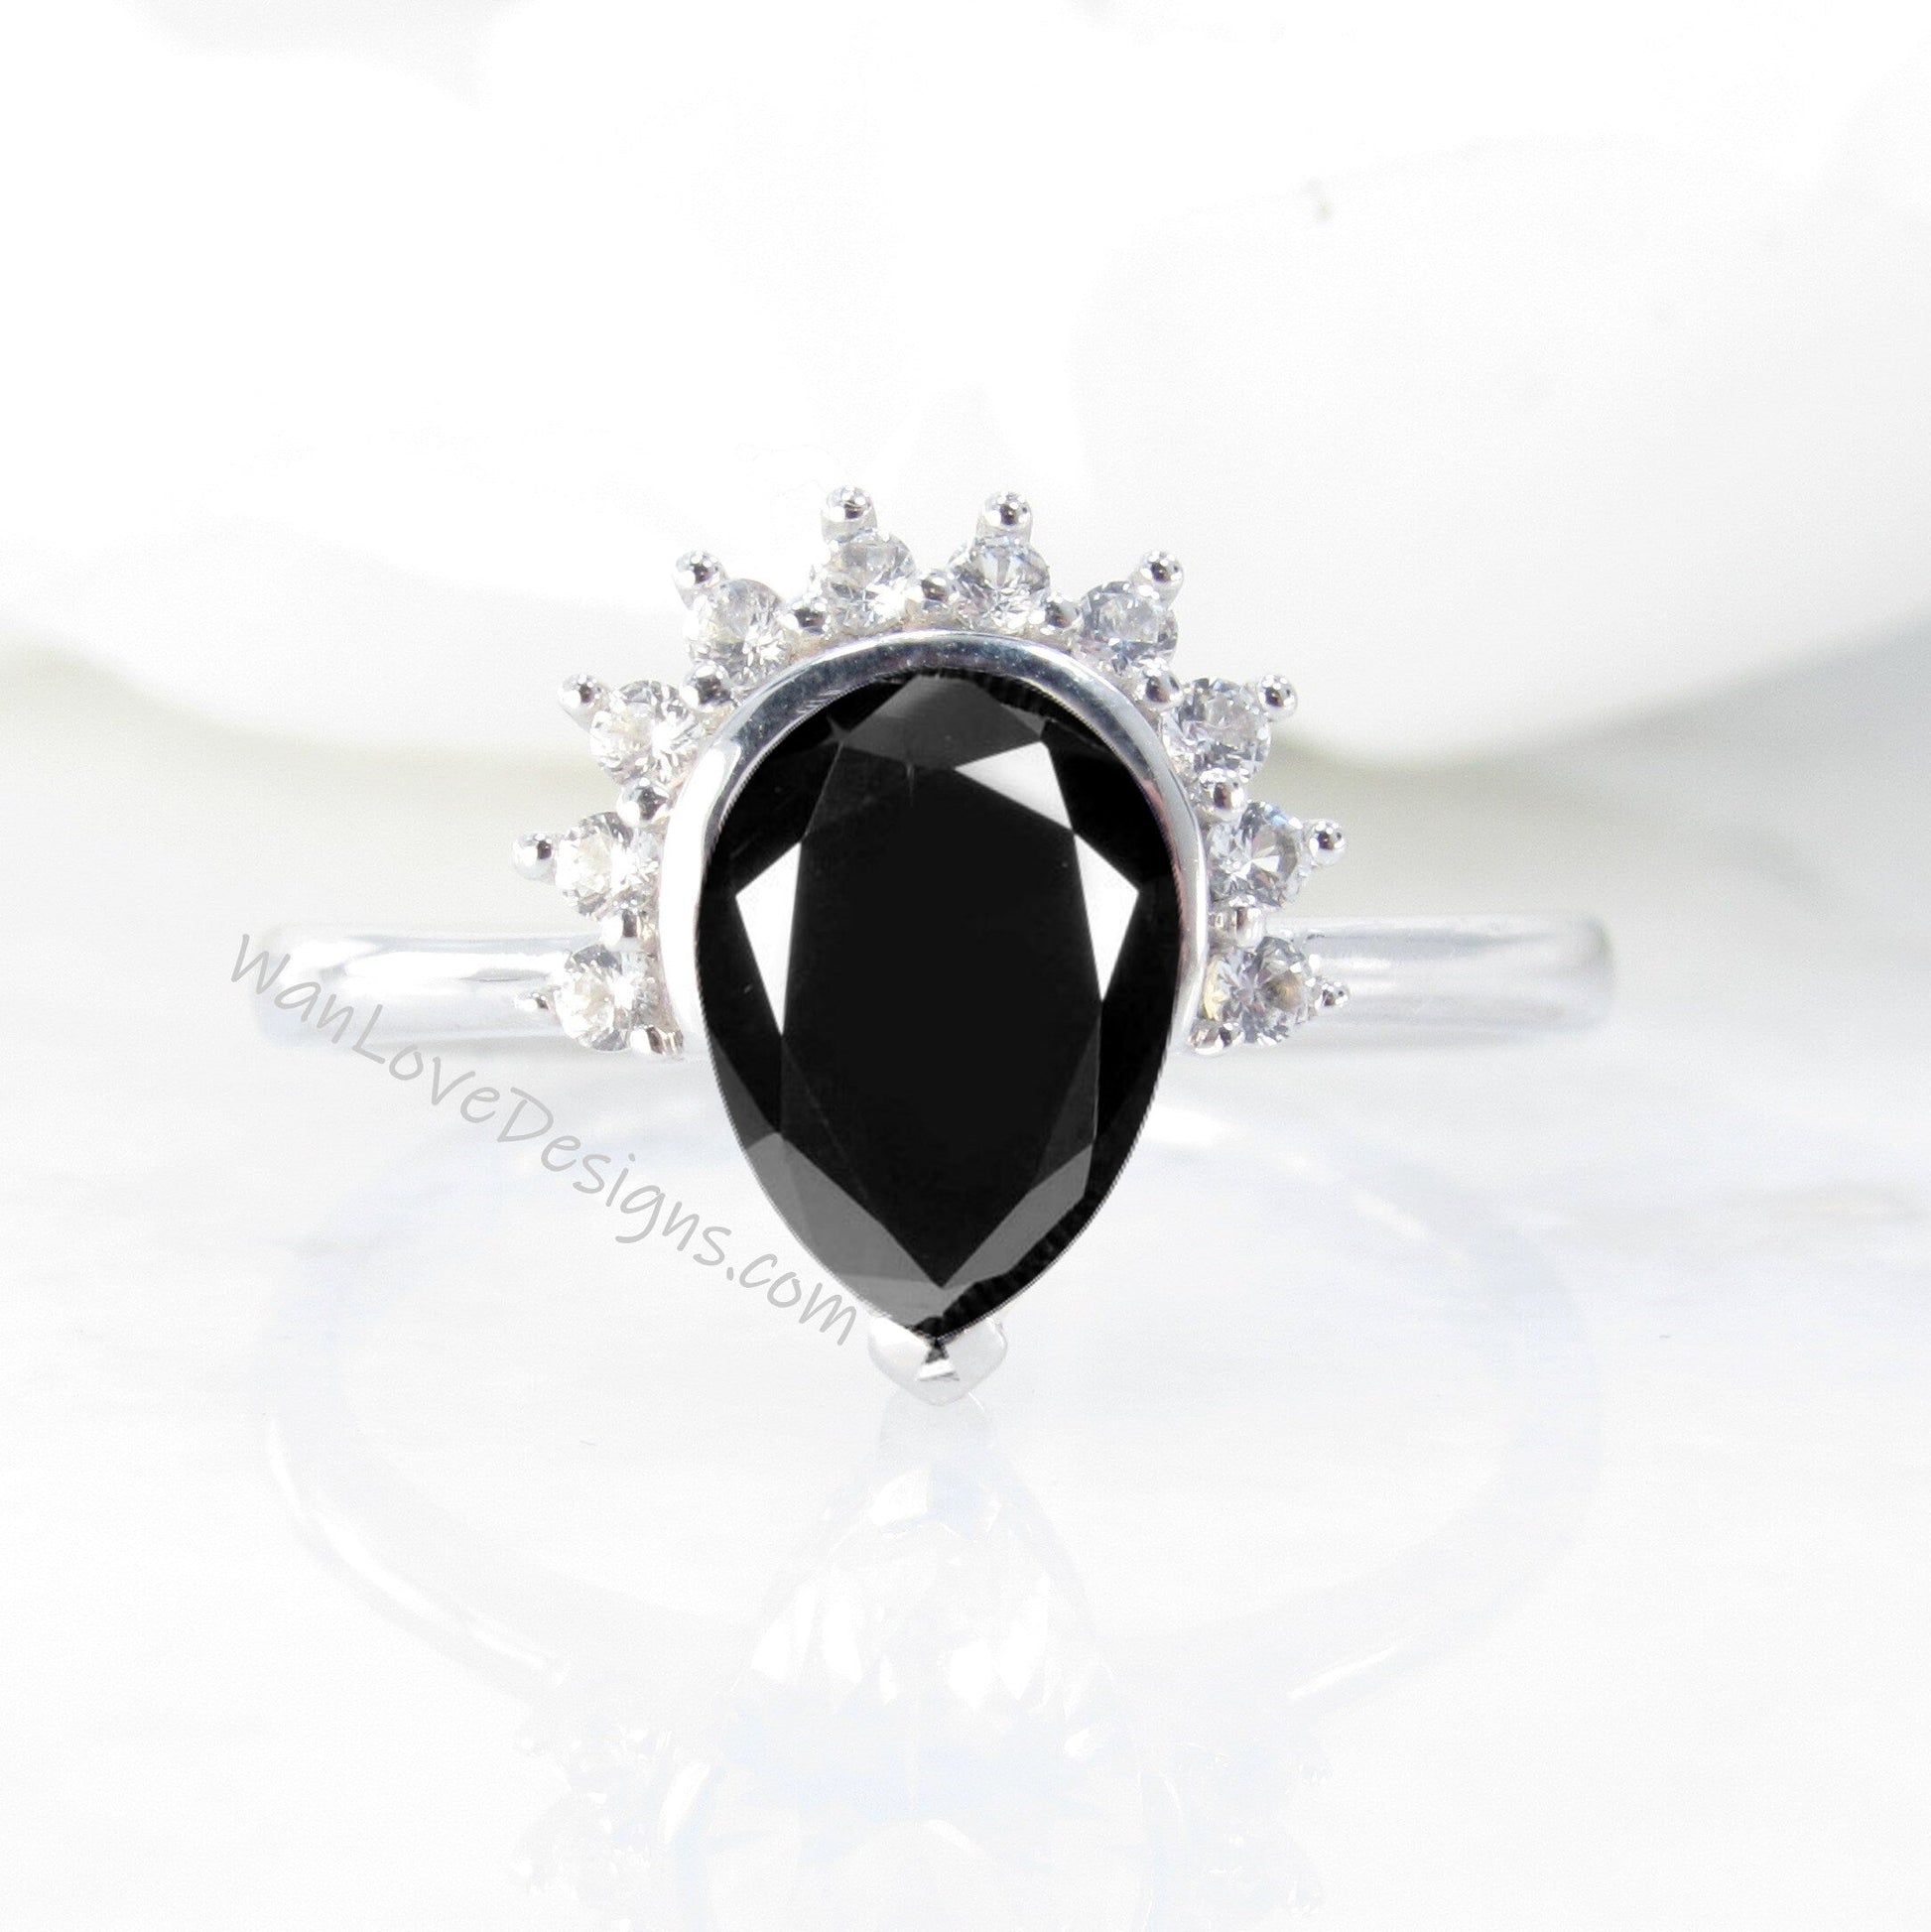 Black Spinel Pear Cut Ring, Semi Bezel Ring, Half Halo Diamonds ring, Black Spinel Engagement Ring, Black and White Halo Ring,WanLoveDesigns Wan Love Designs